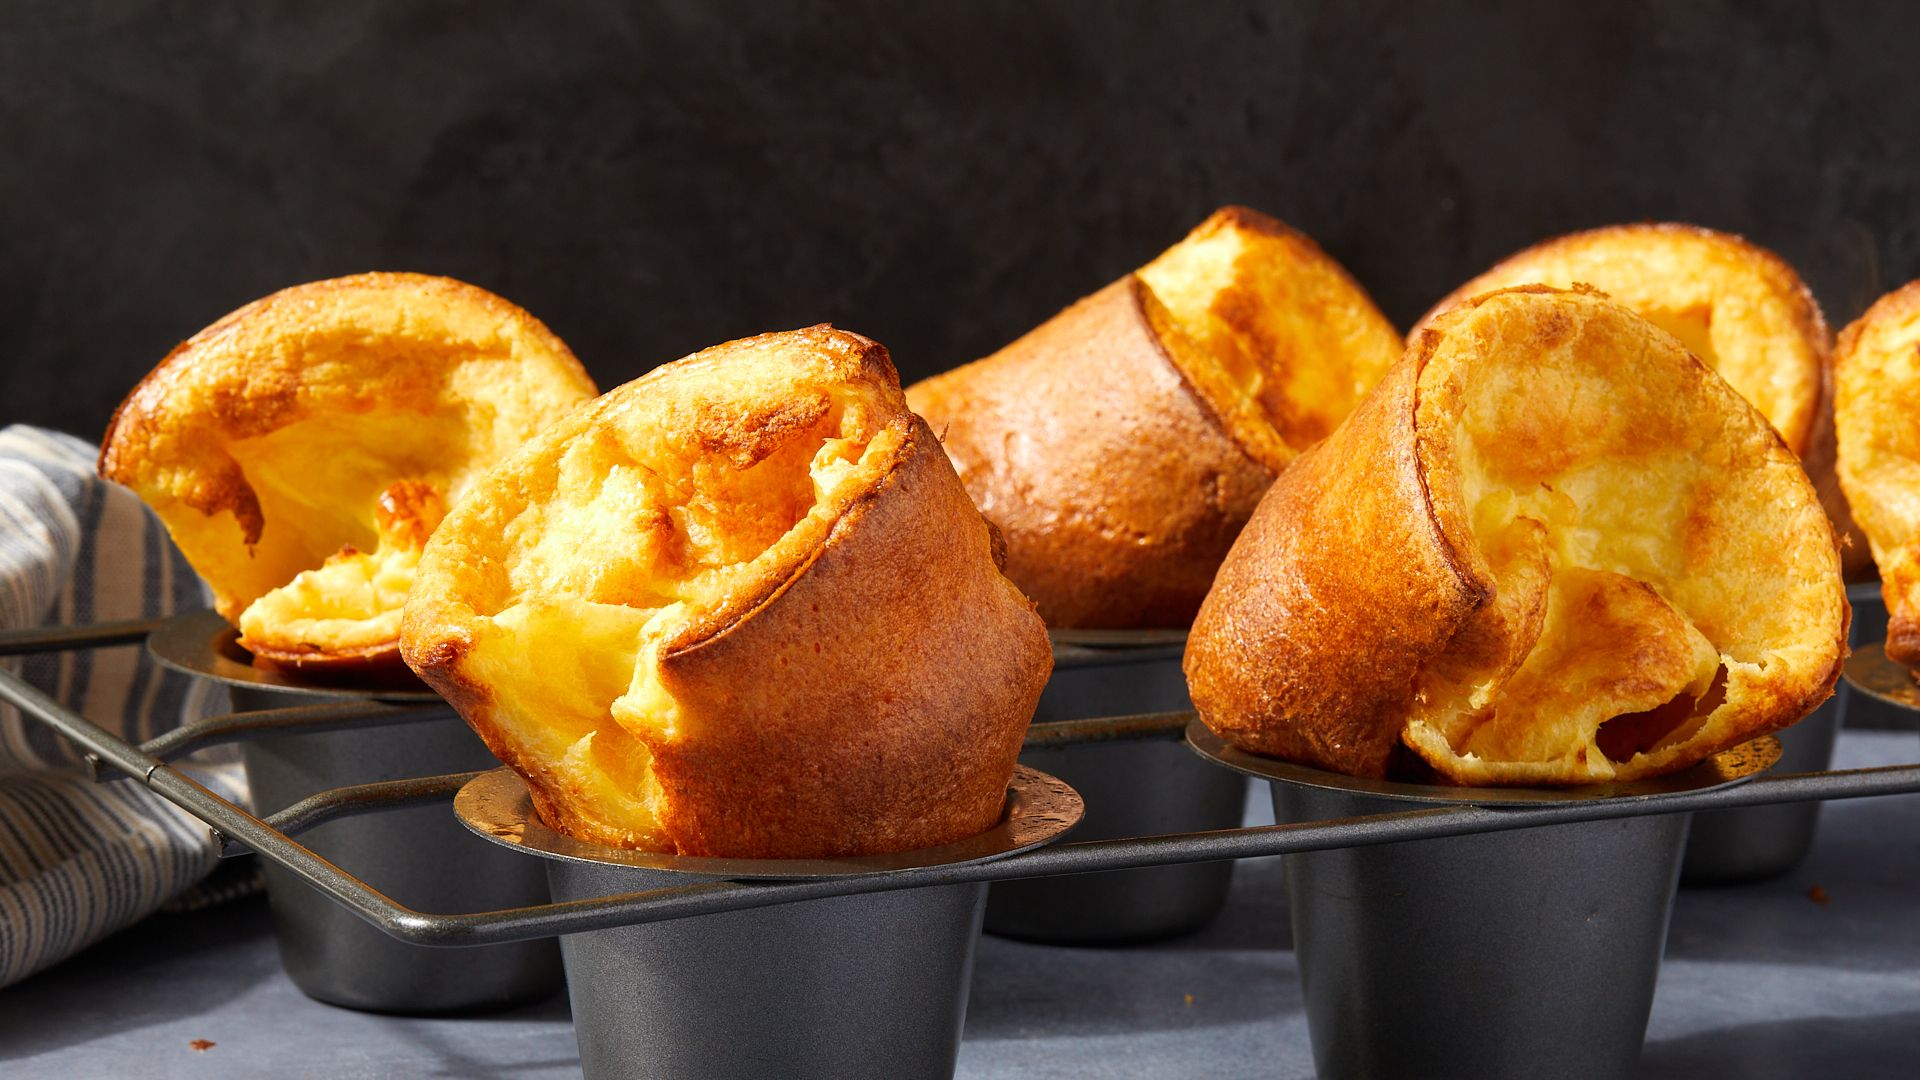 https://hips.hearstapps.com/hmg-prod/images/yorkshire-pudding1-1667499266.jpg?crop=1xw:0.84375xh;center,top